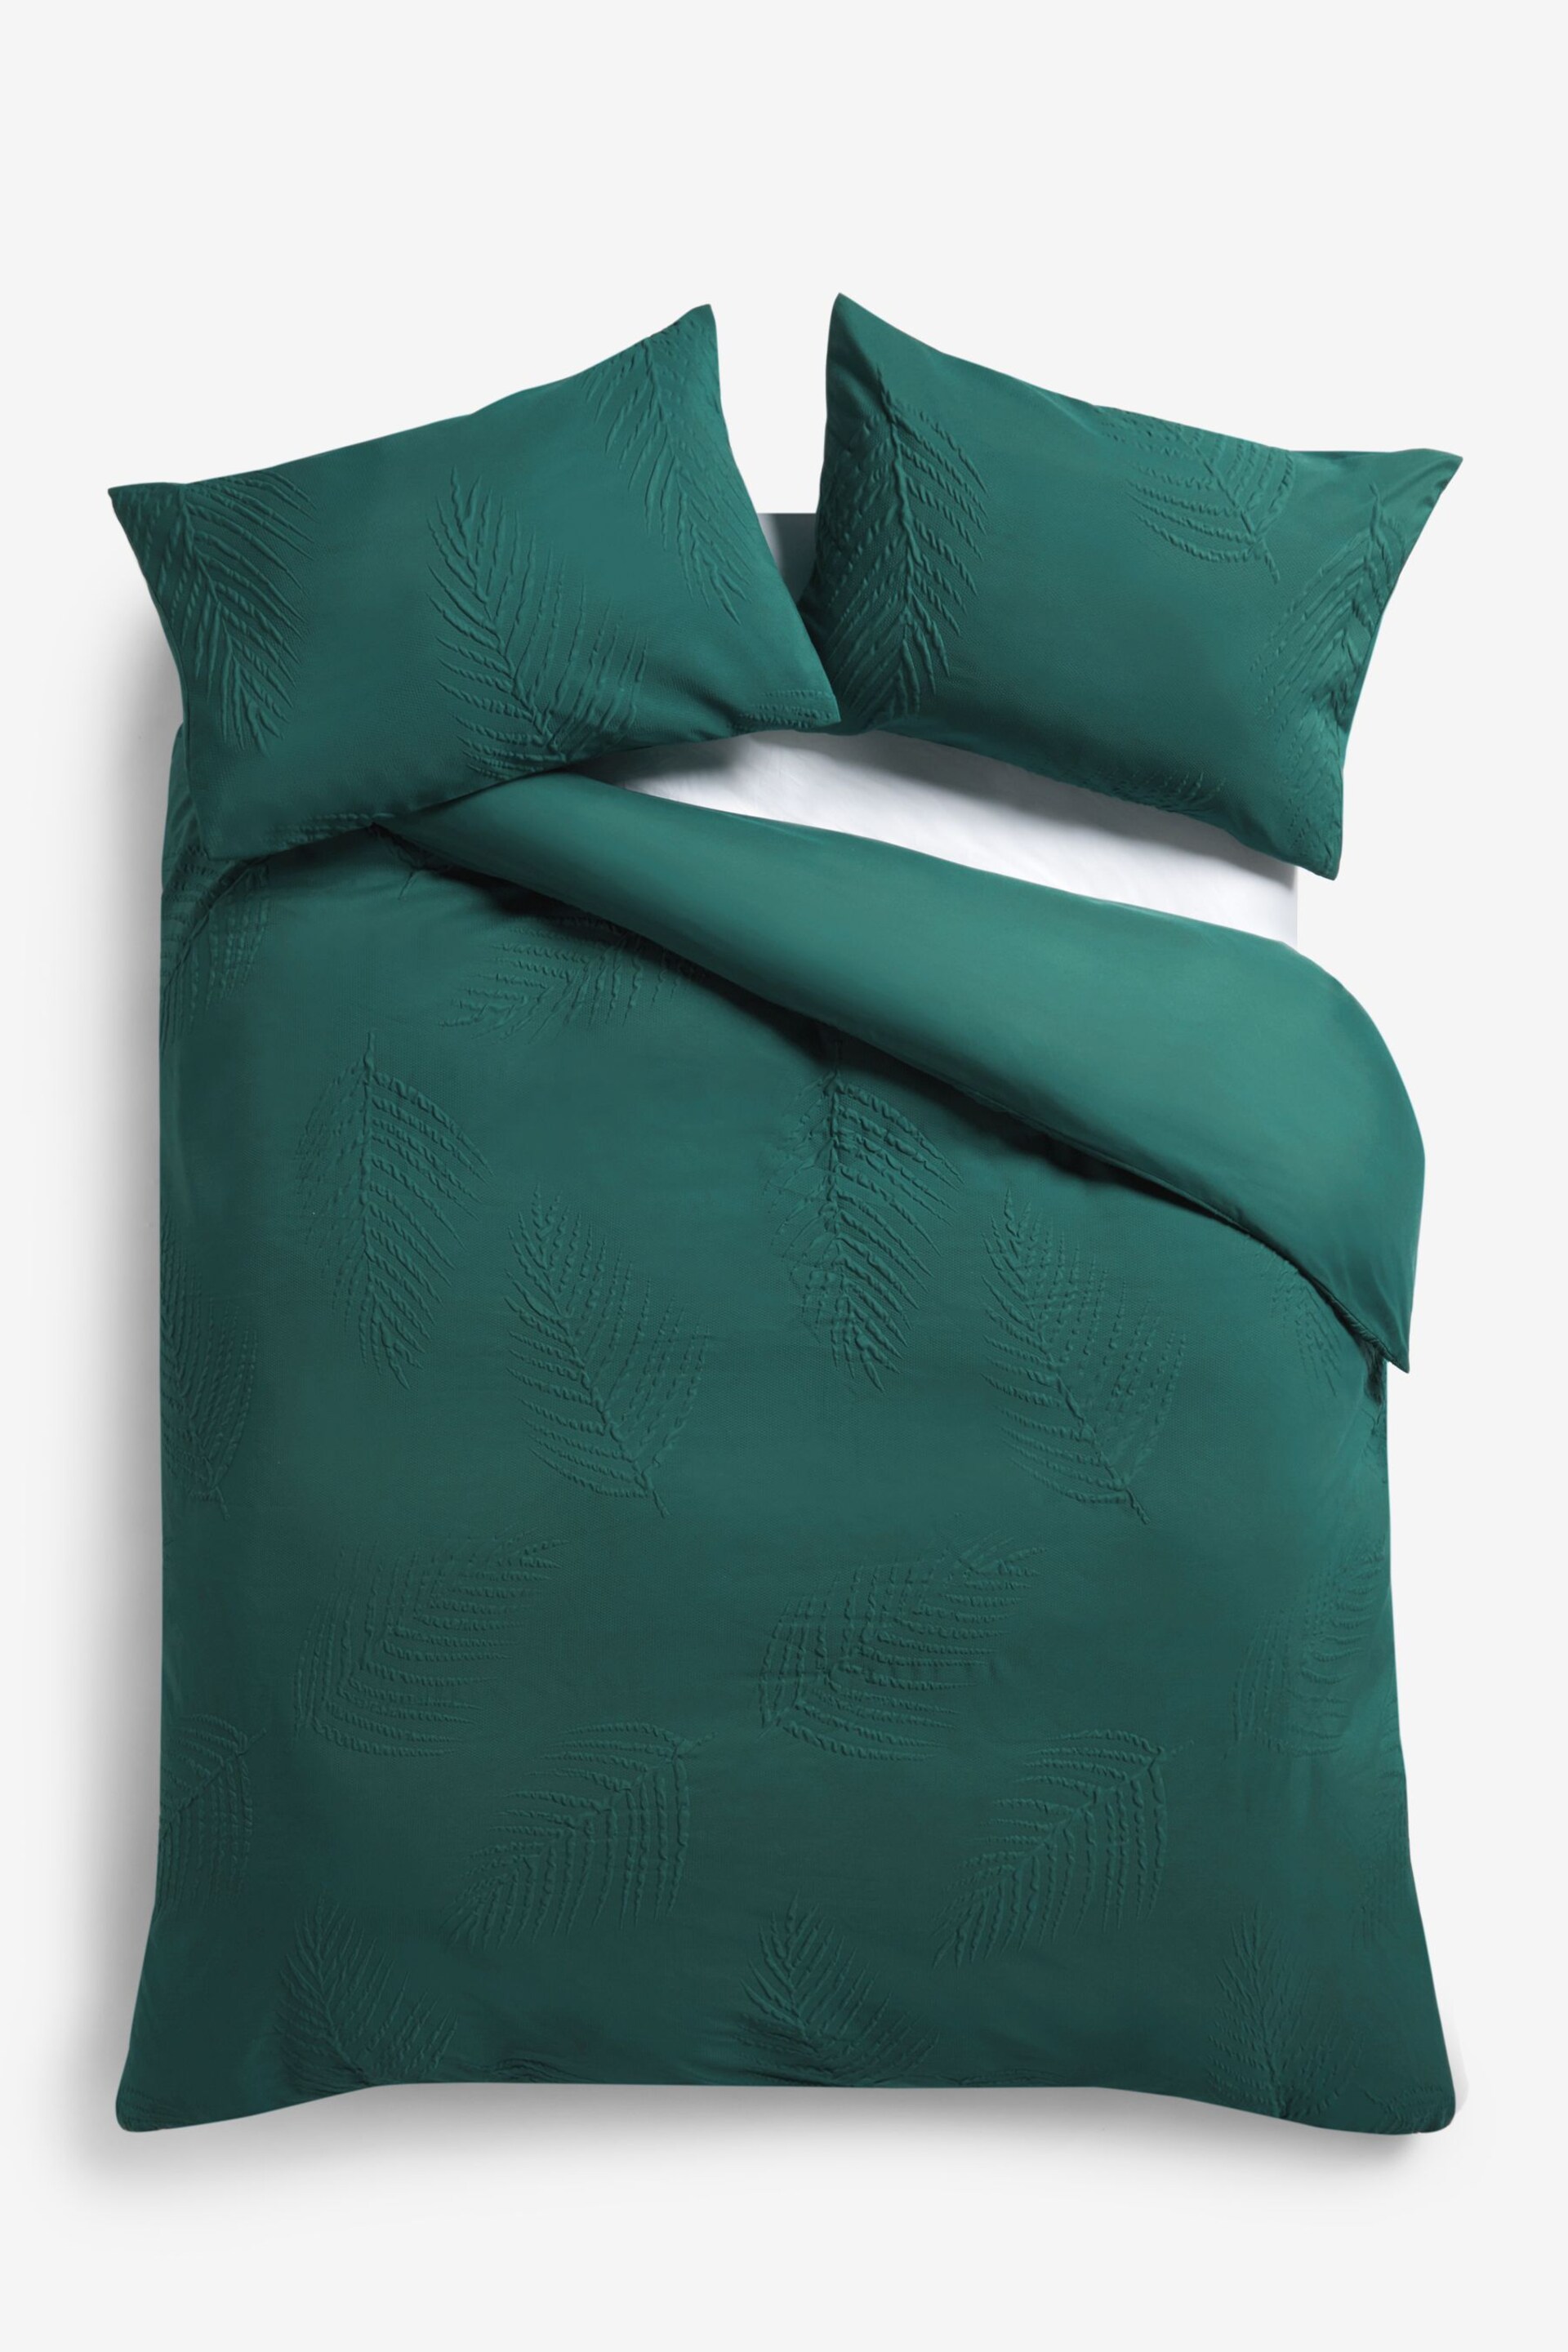 Green Embossed Leaf Duvet Cover and Pillowcase Set - Image 5 of 5